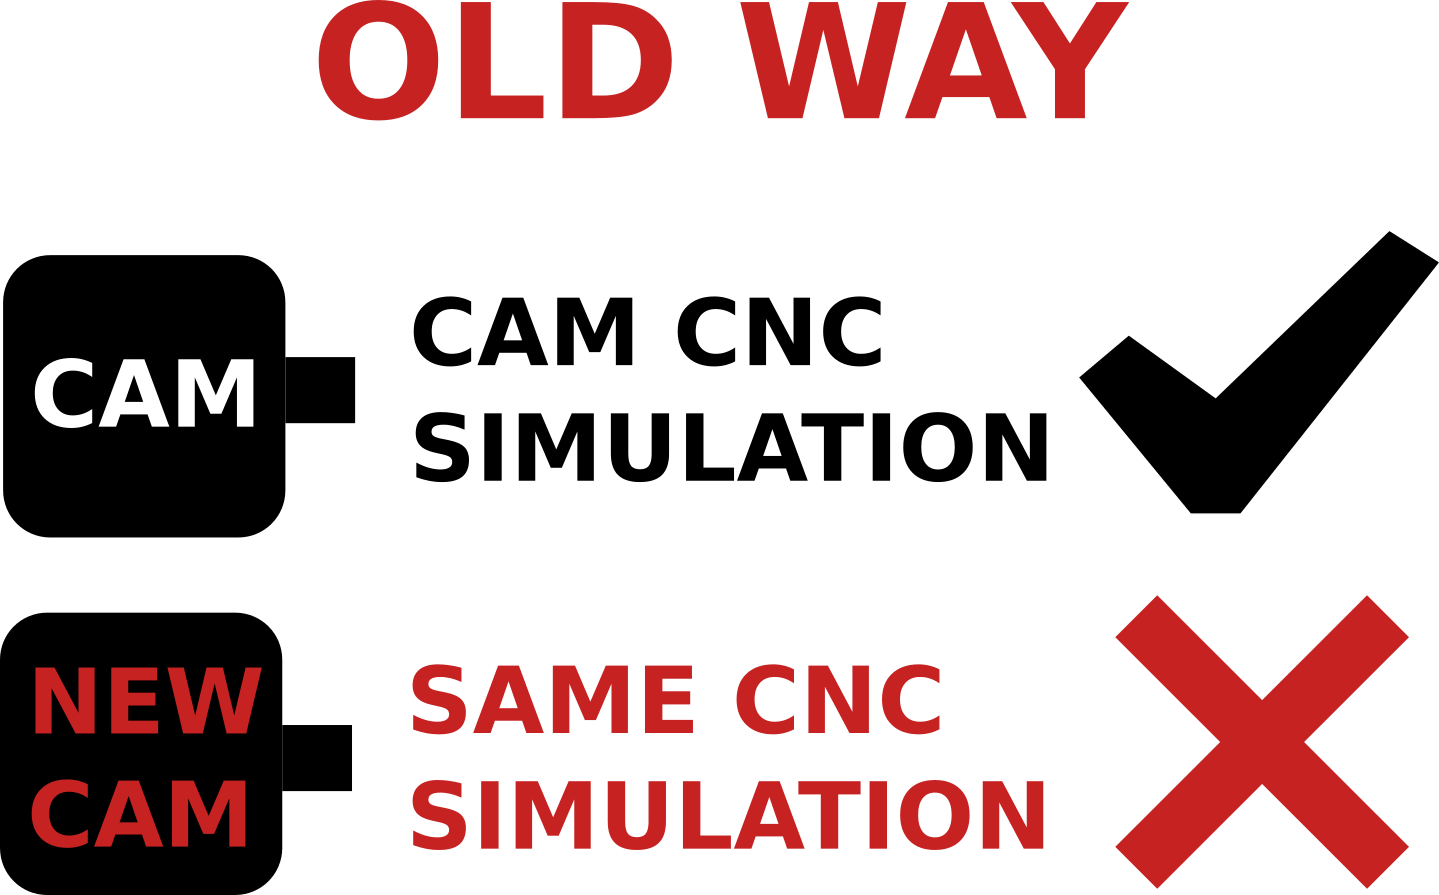 MYTHS AND TRUTHS ABOUT CNC SIMULATION